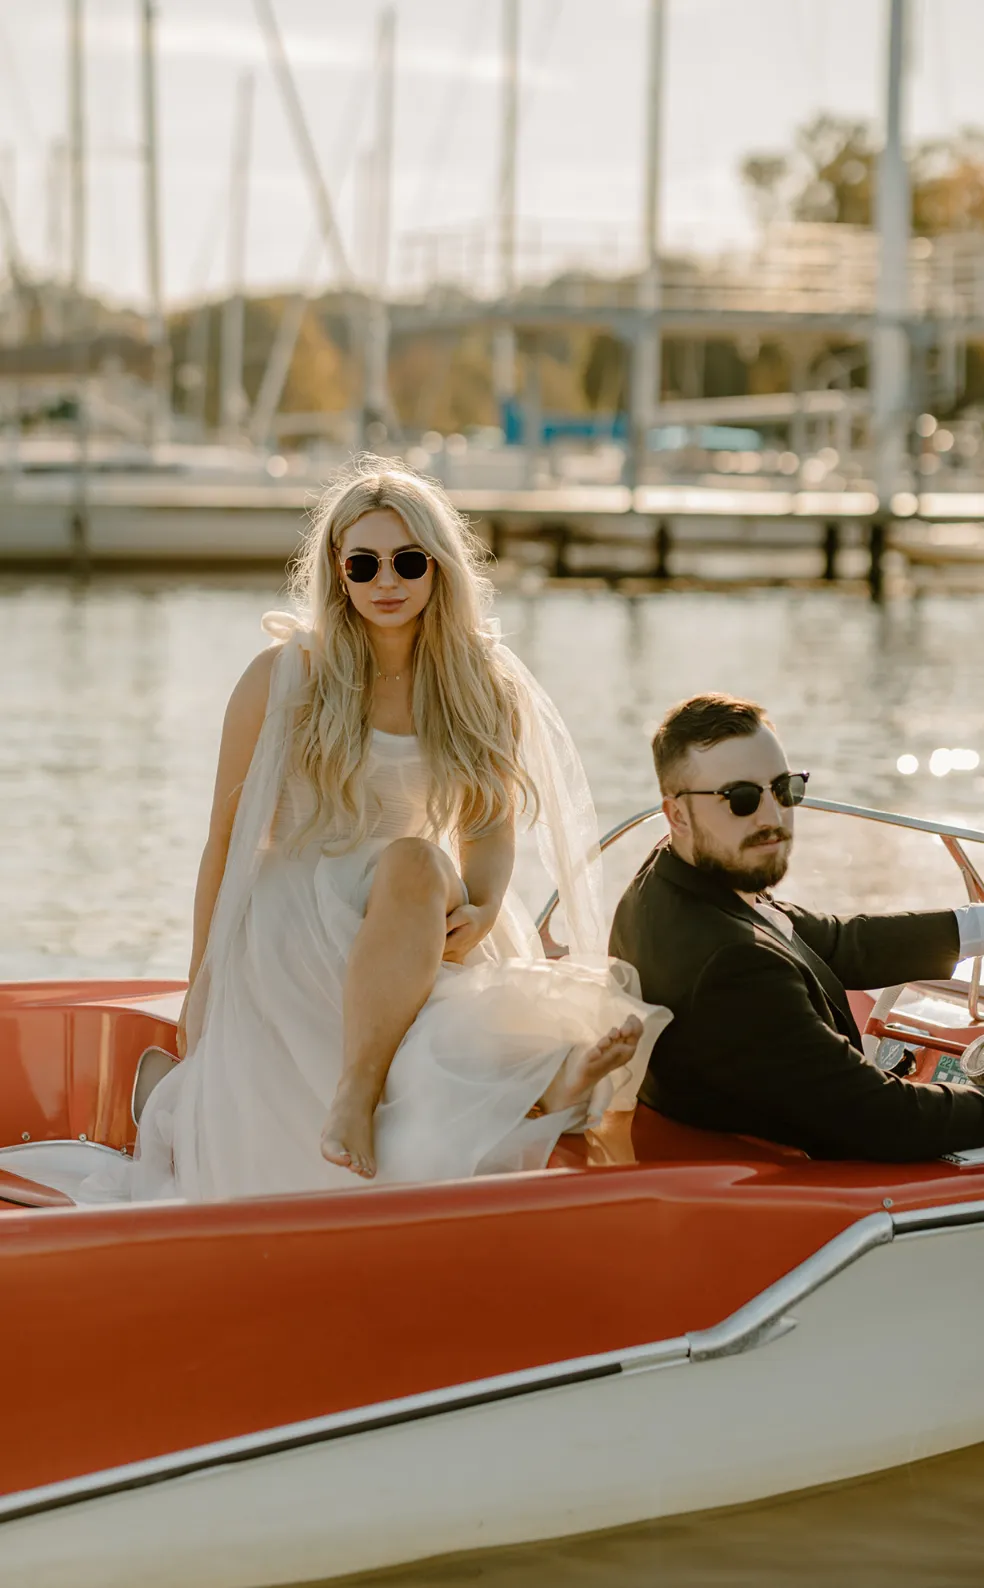 Chloe and Brandon posing with glasses on a boat